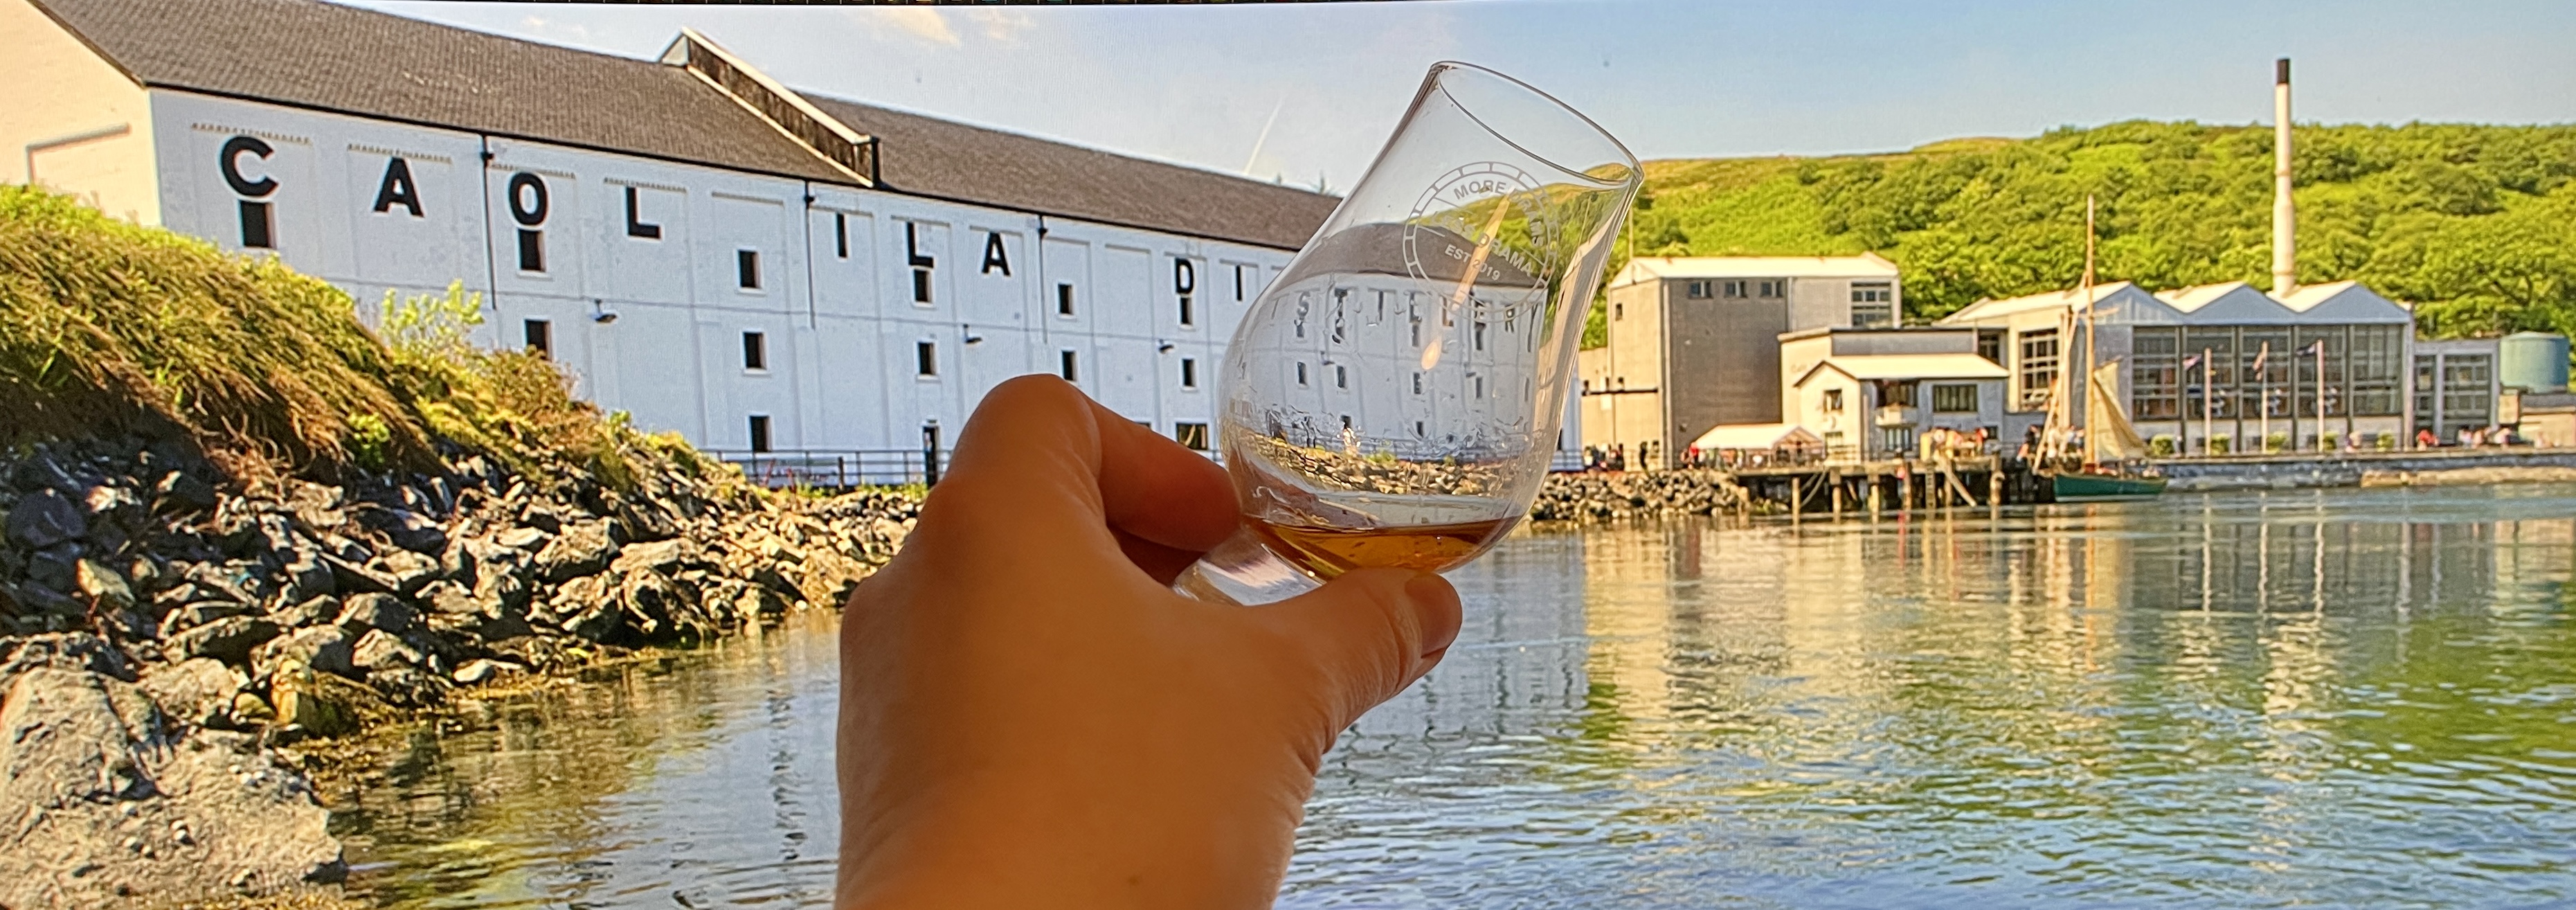 Caol Ila 2010 Signatory Vintage in front of the distillery.